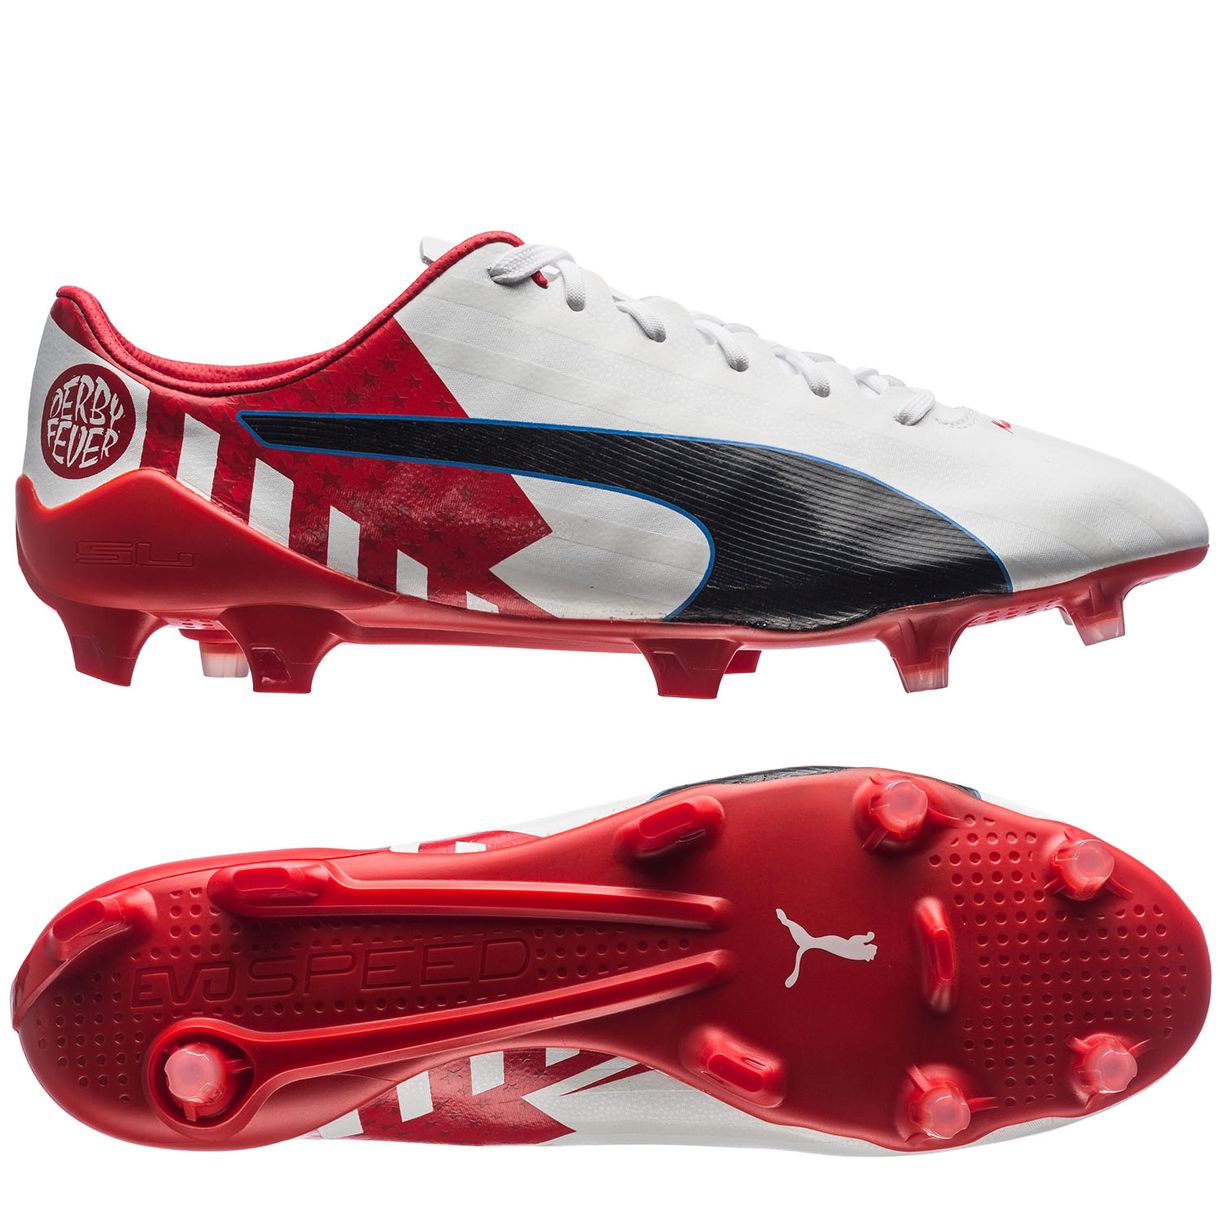 puma derby fever boots